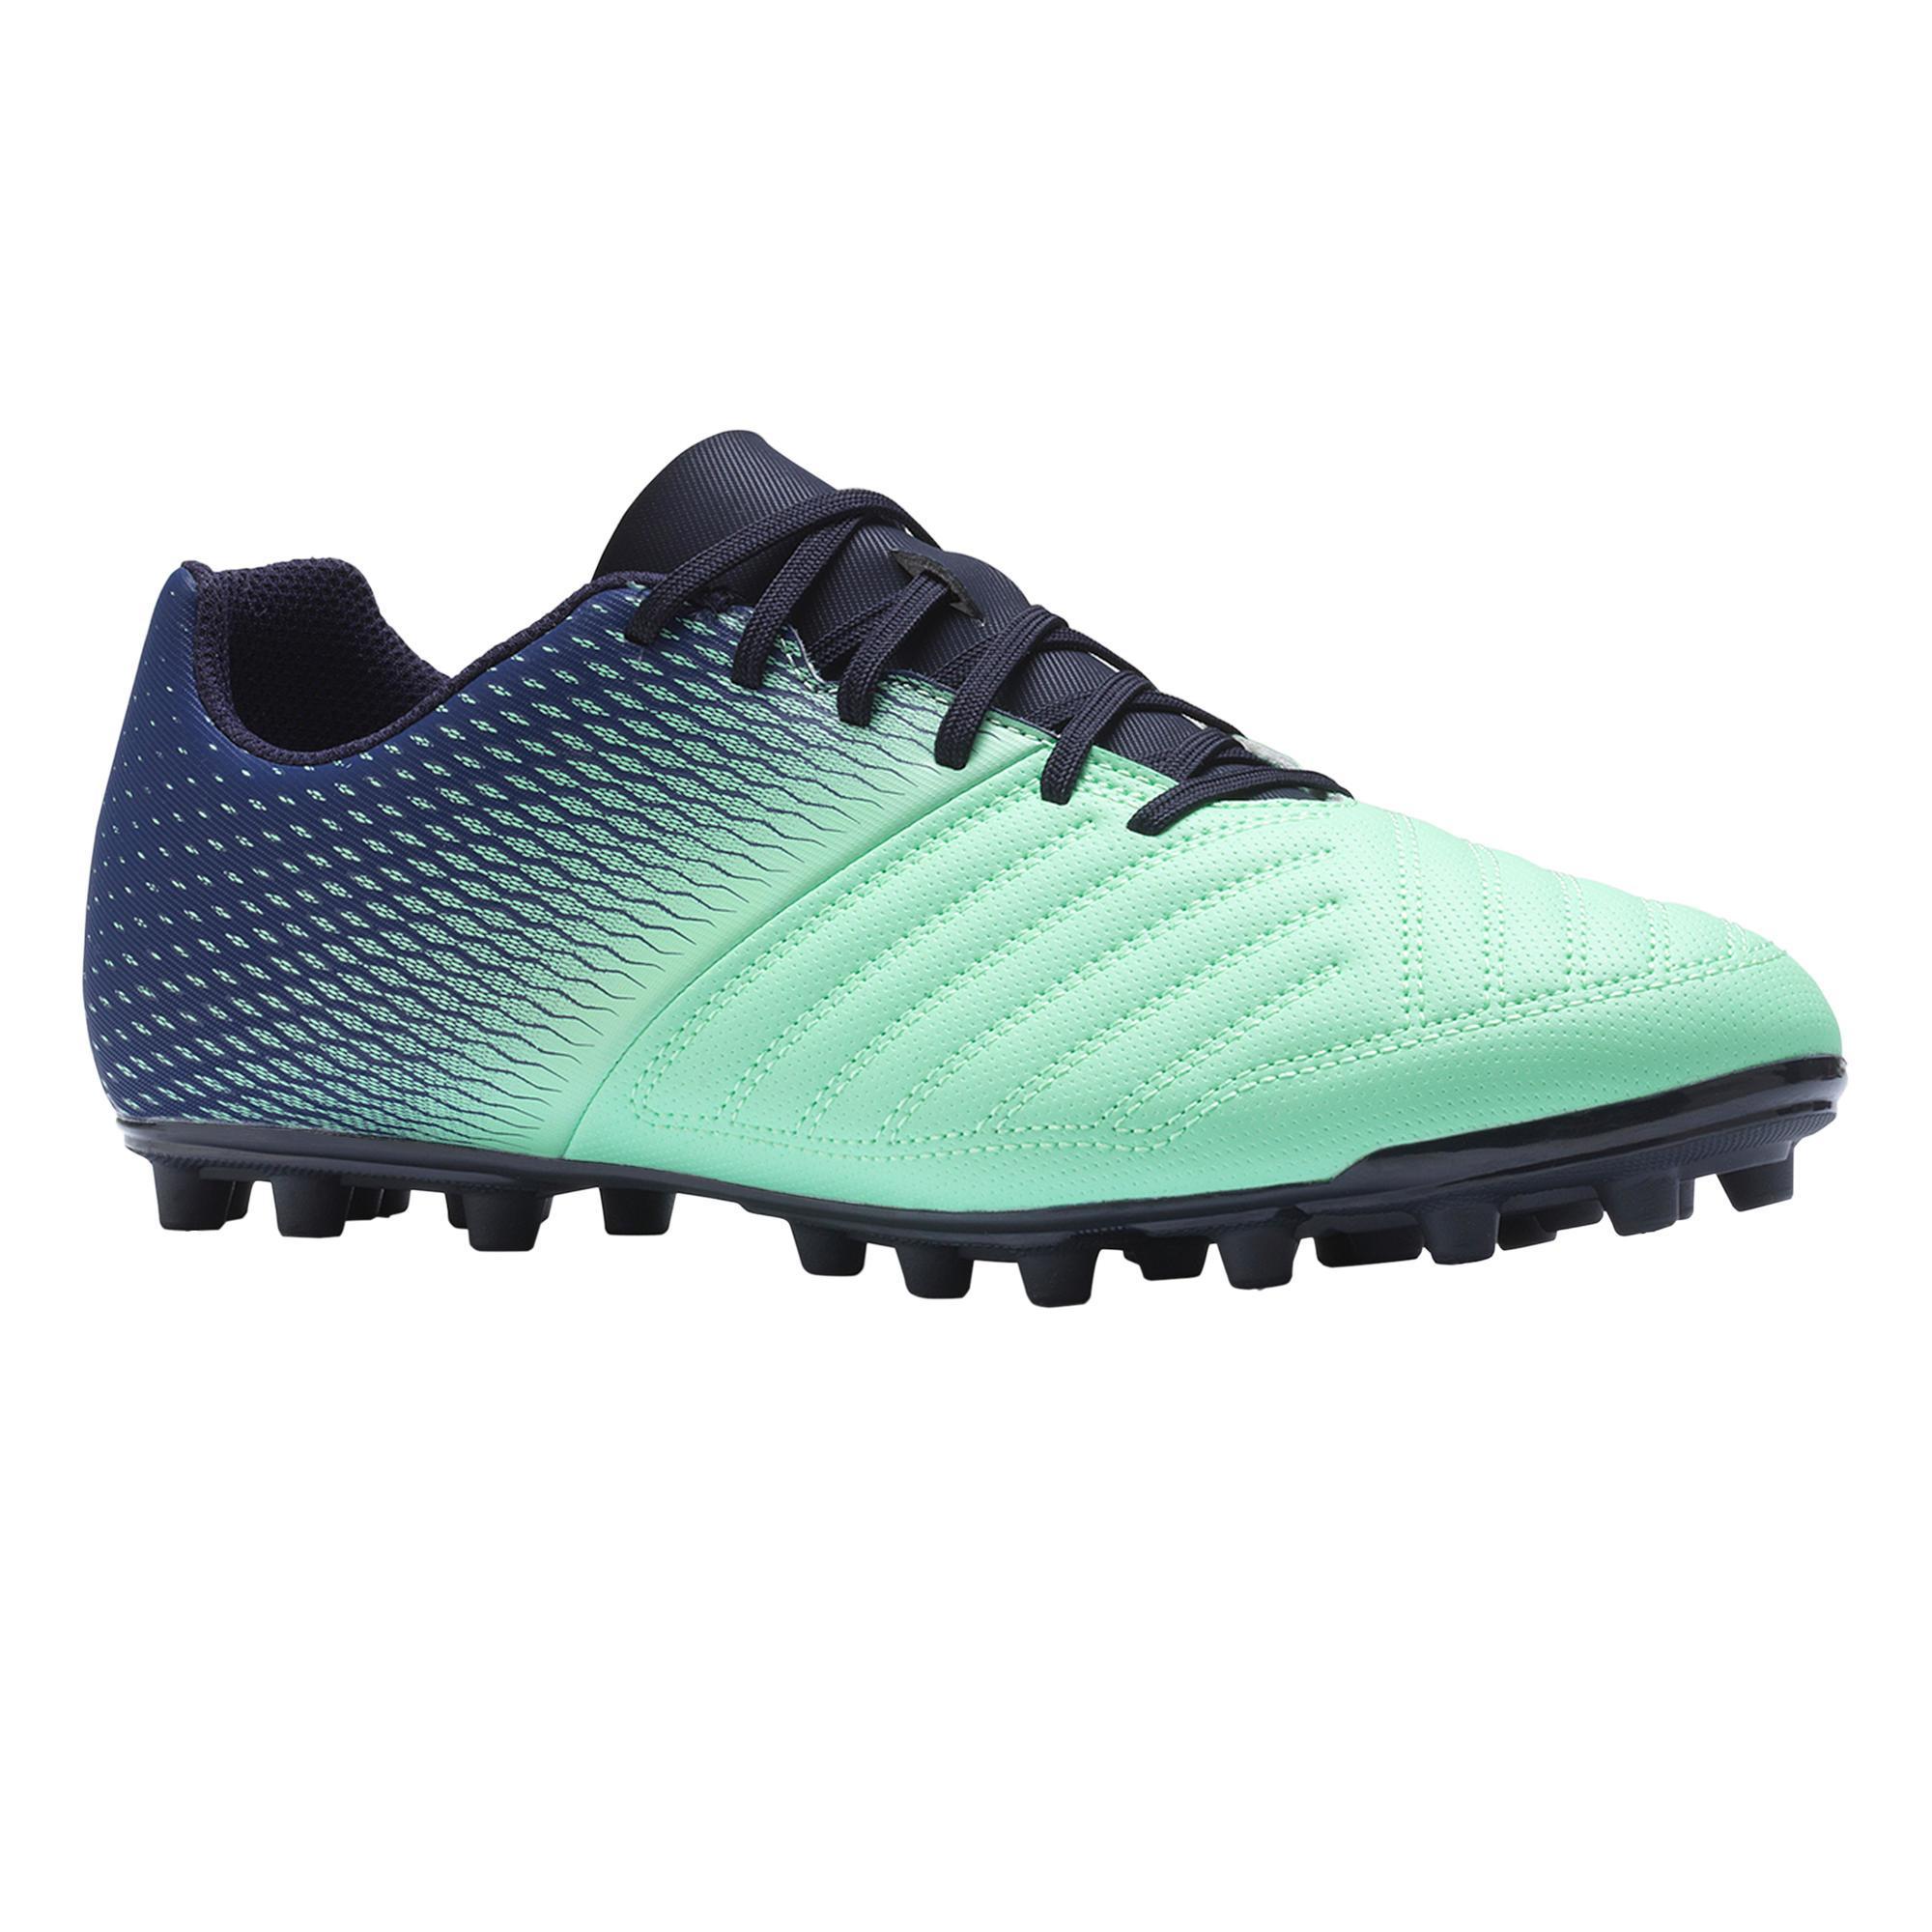 Agility 140 FG Adult Dry Pitches Football Boots - Blue/Green - Decathlon